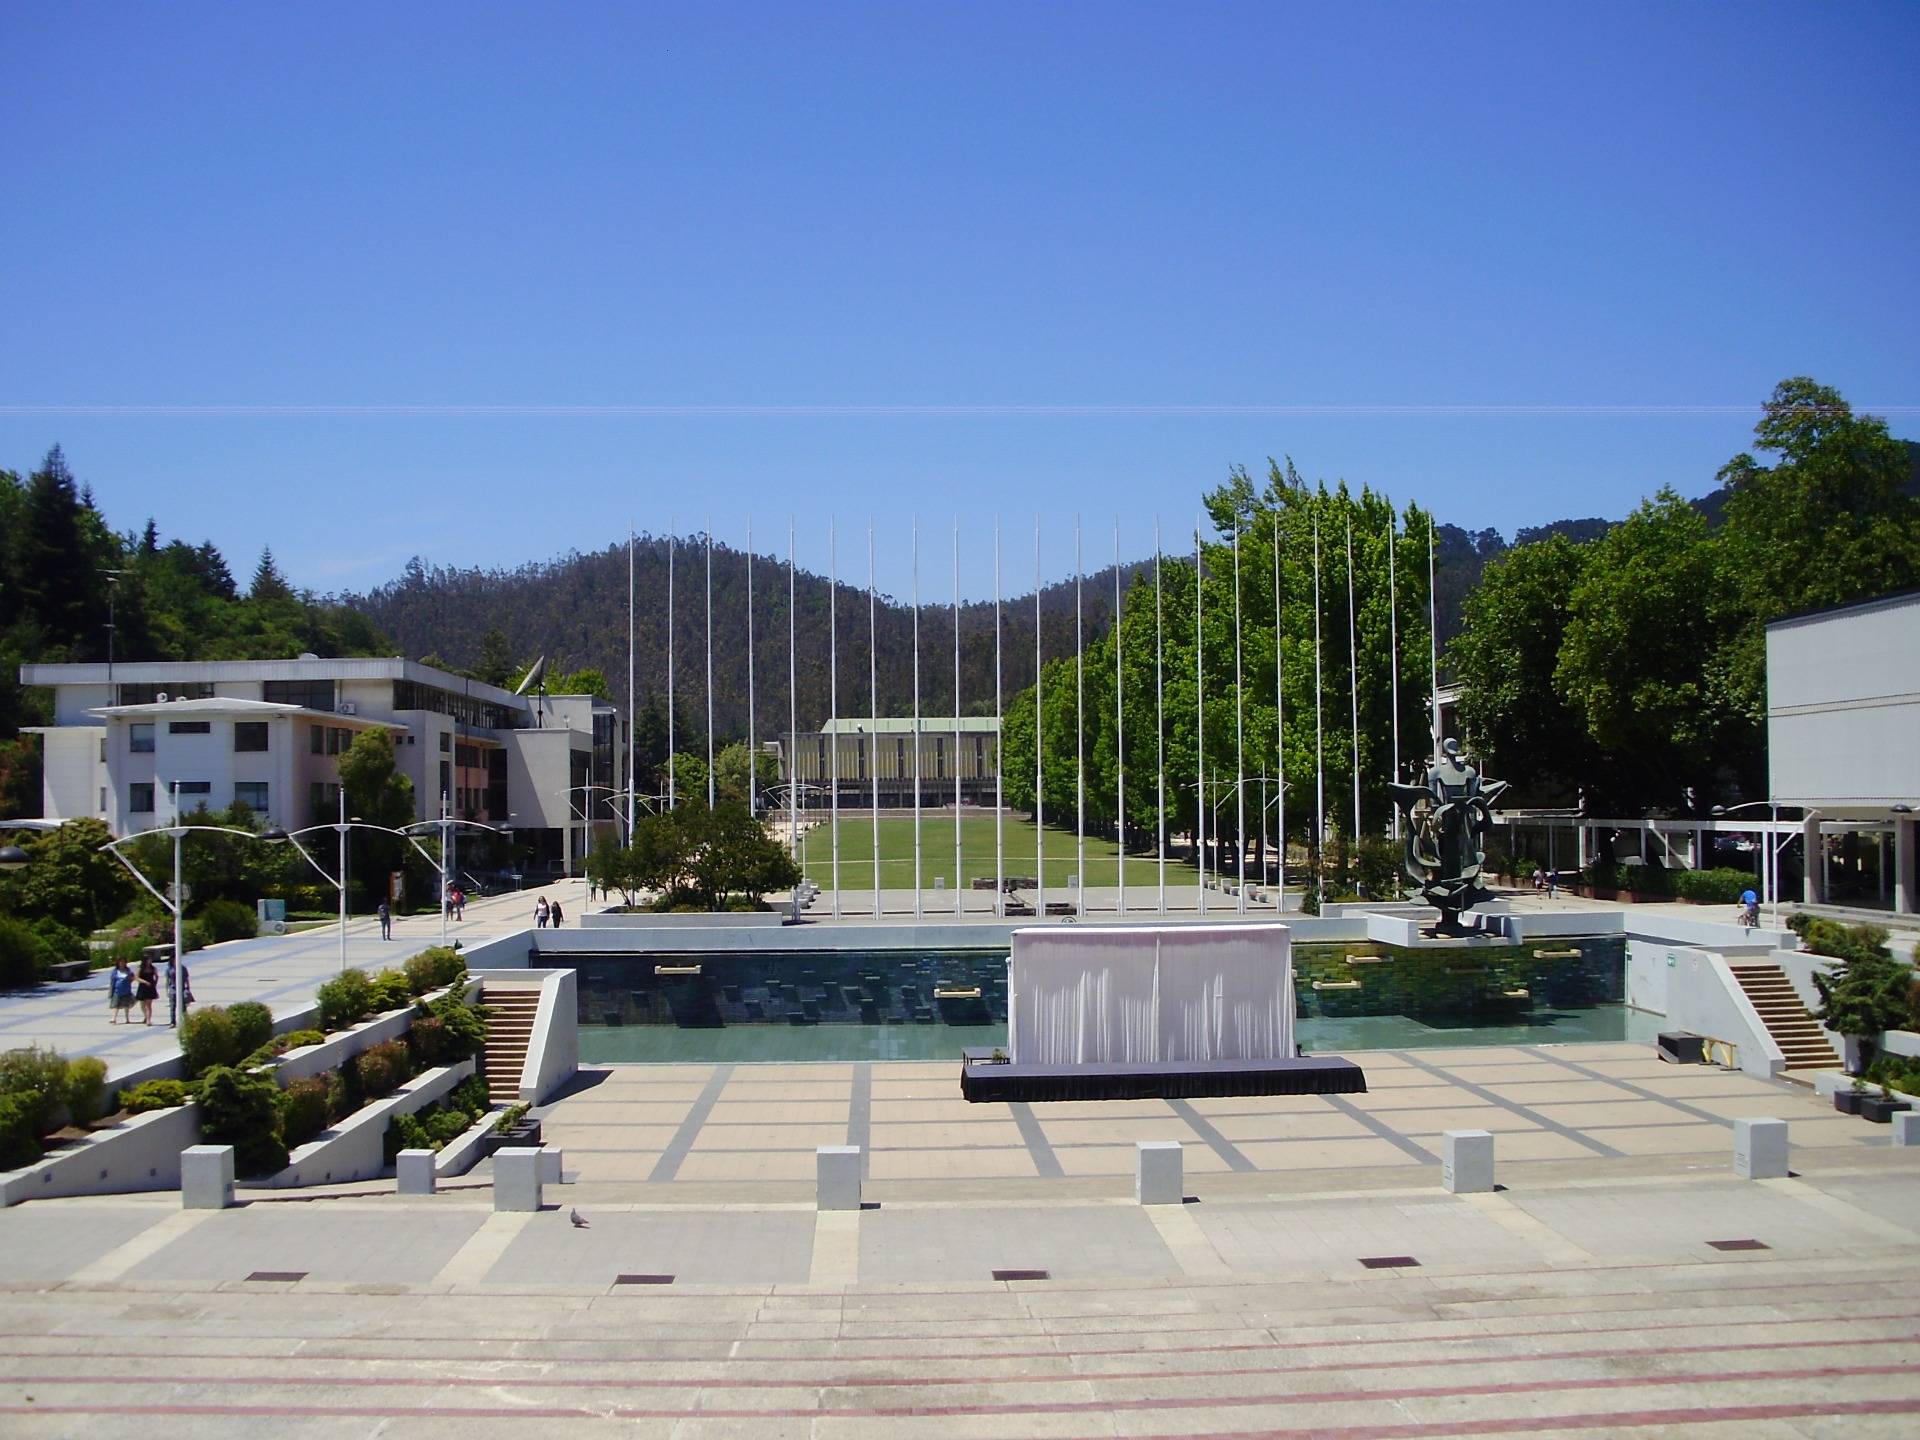 Central area of the university campu